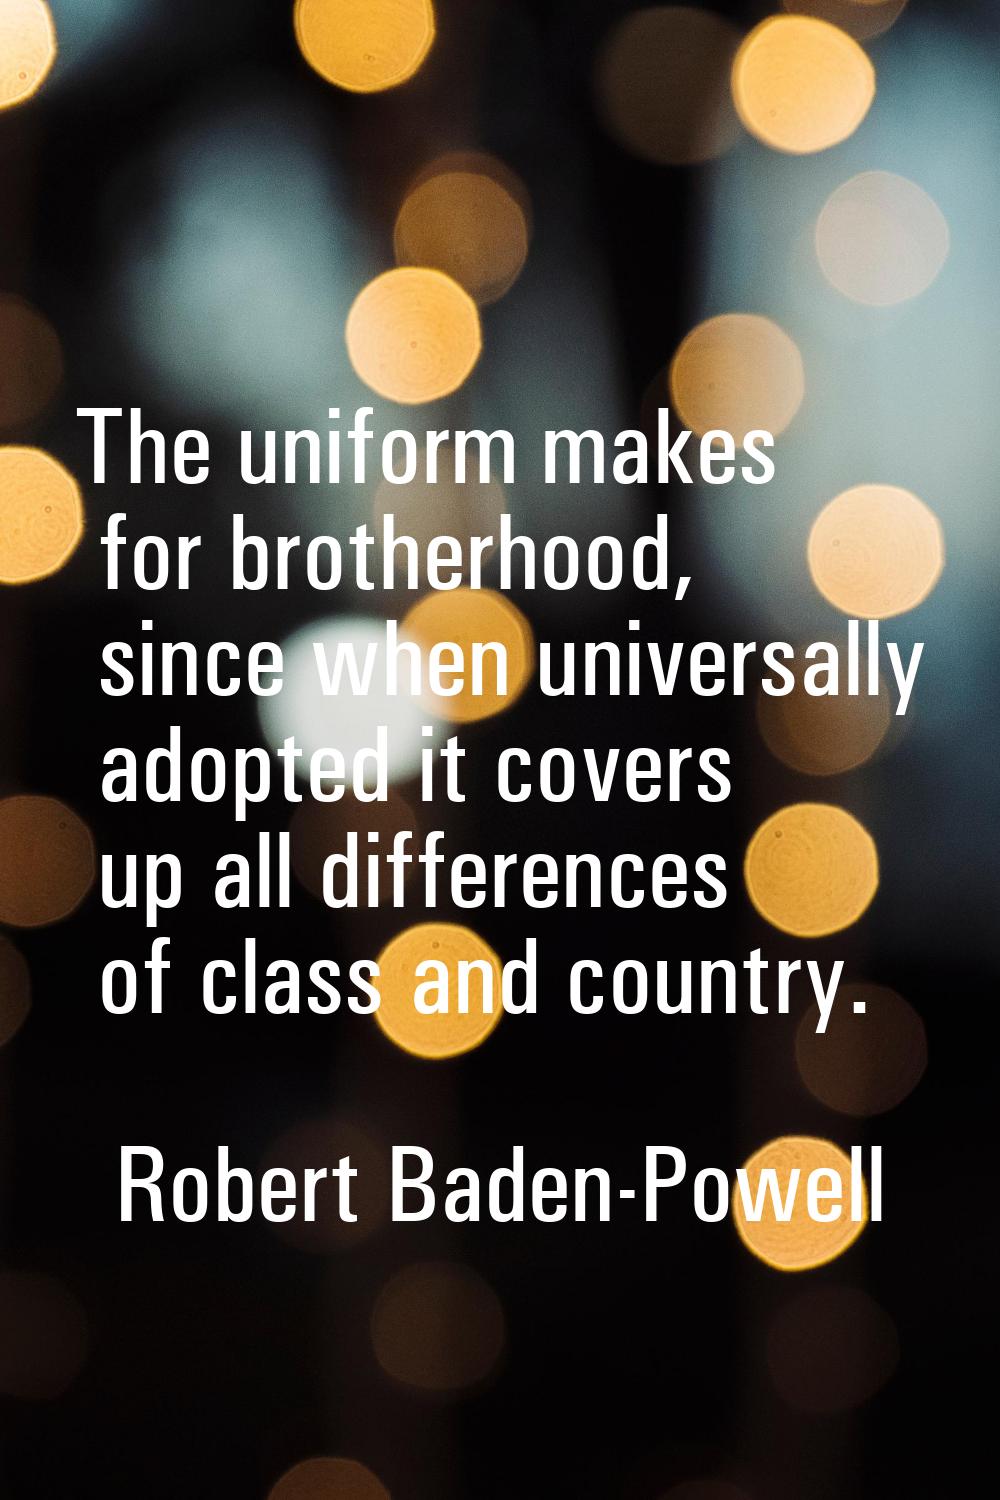 The uniform makes for brotherhood, since when universally adopted it covers up all differences of c